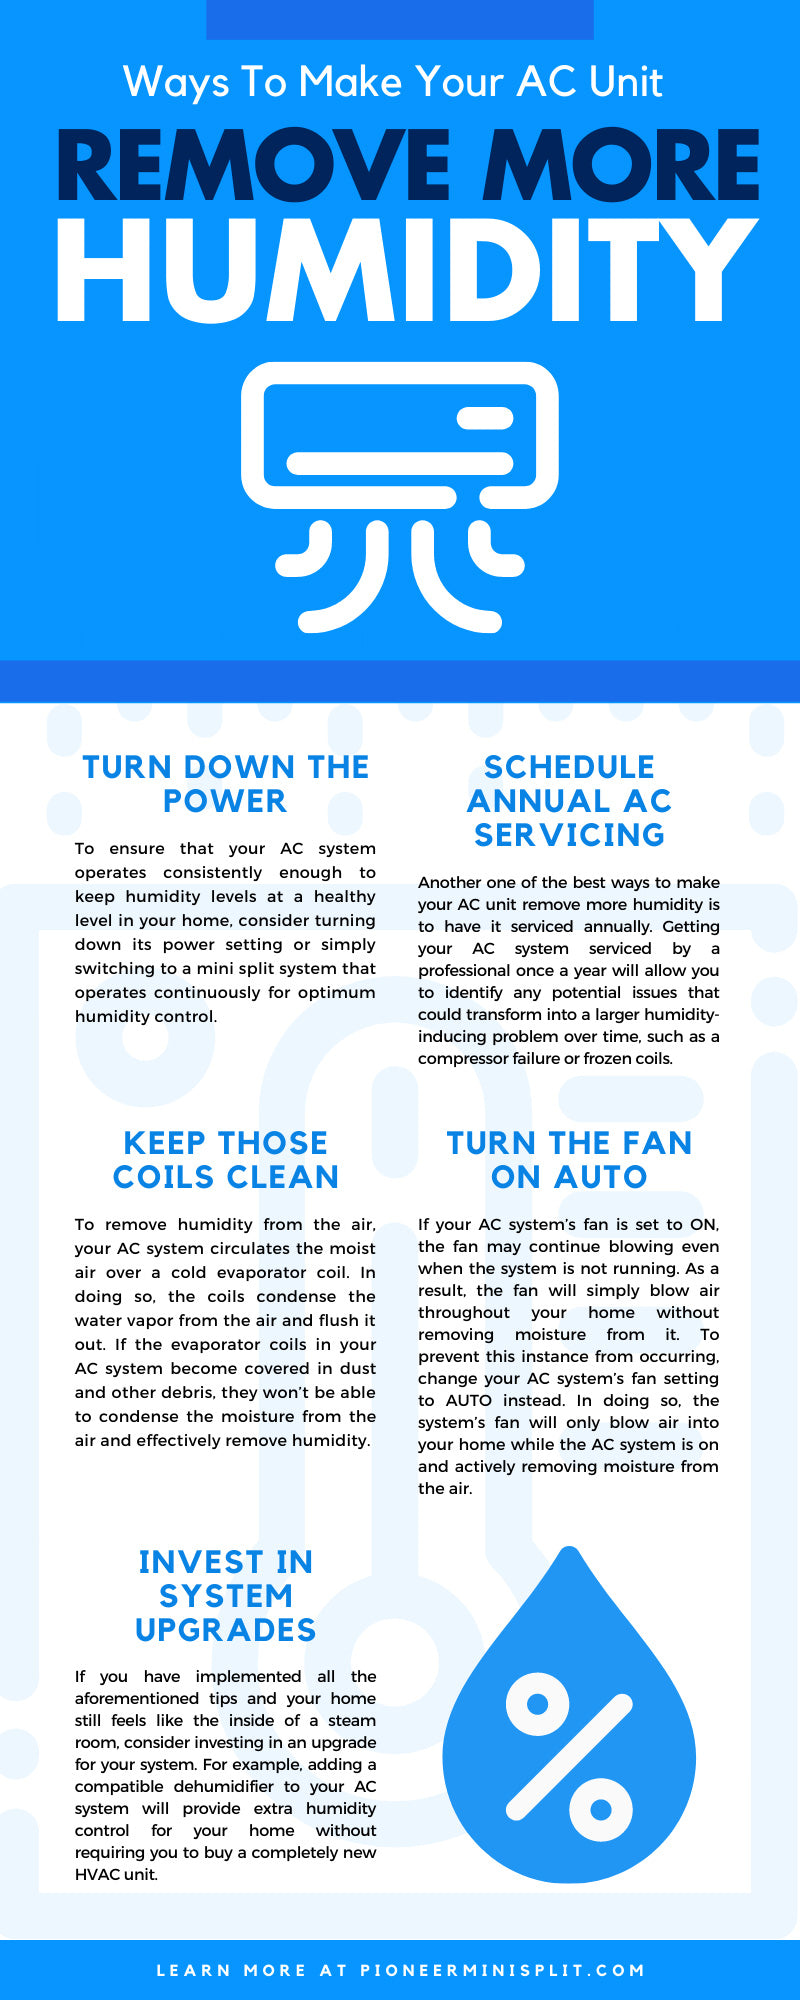 The Key to Mold Control is Moisture Control - Infographic